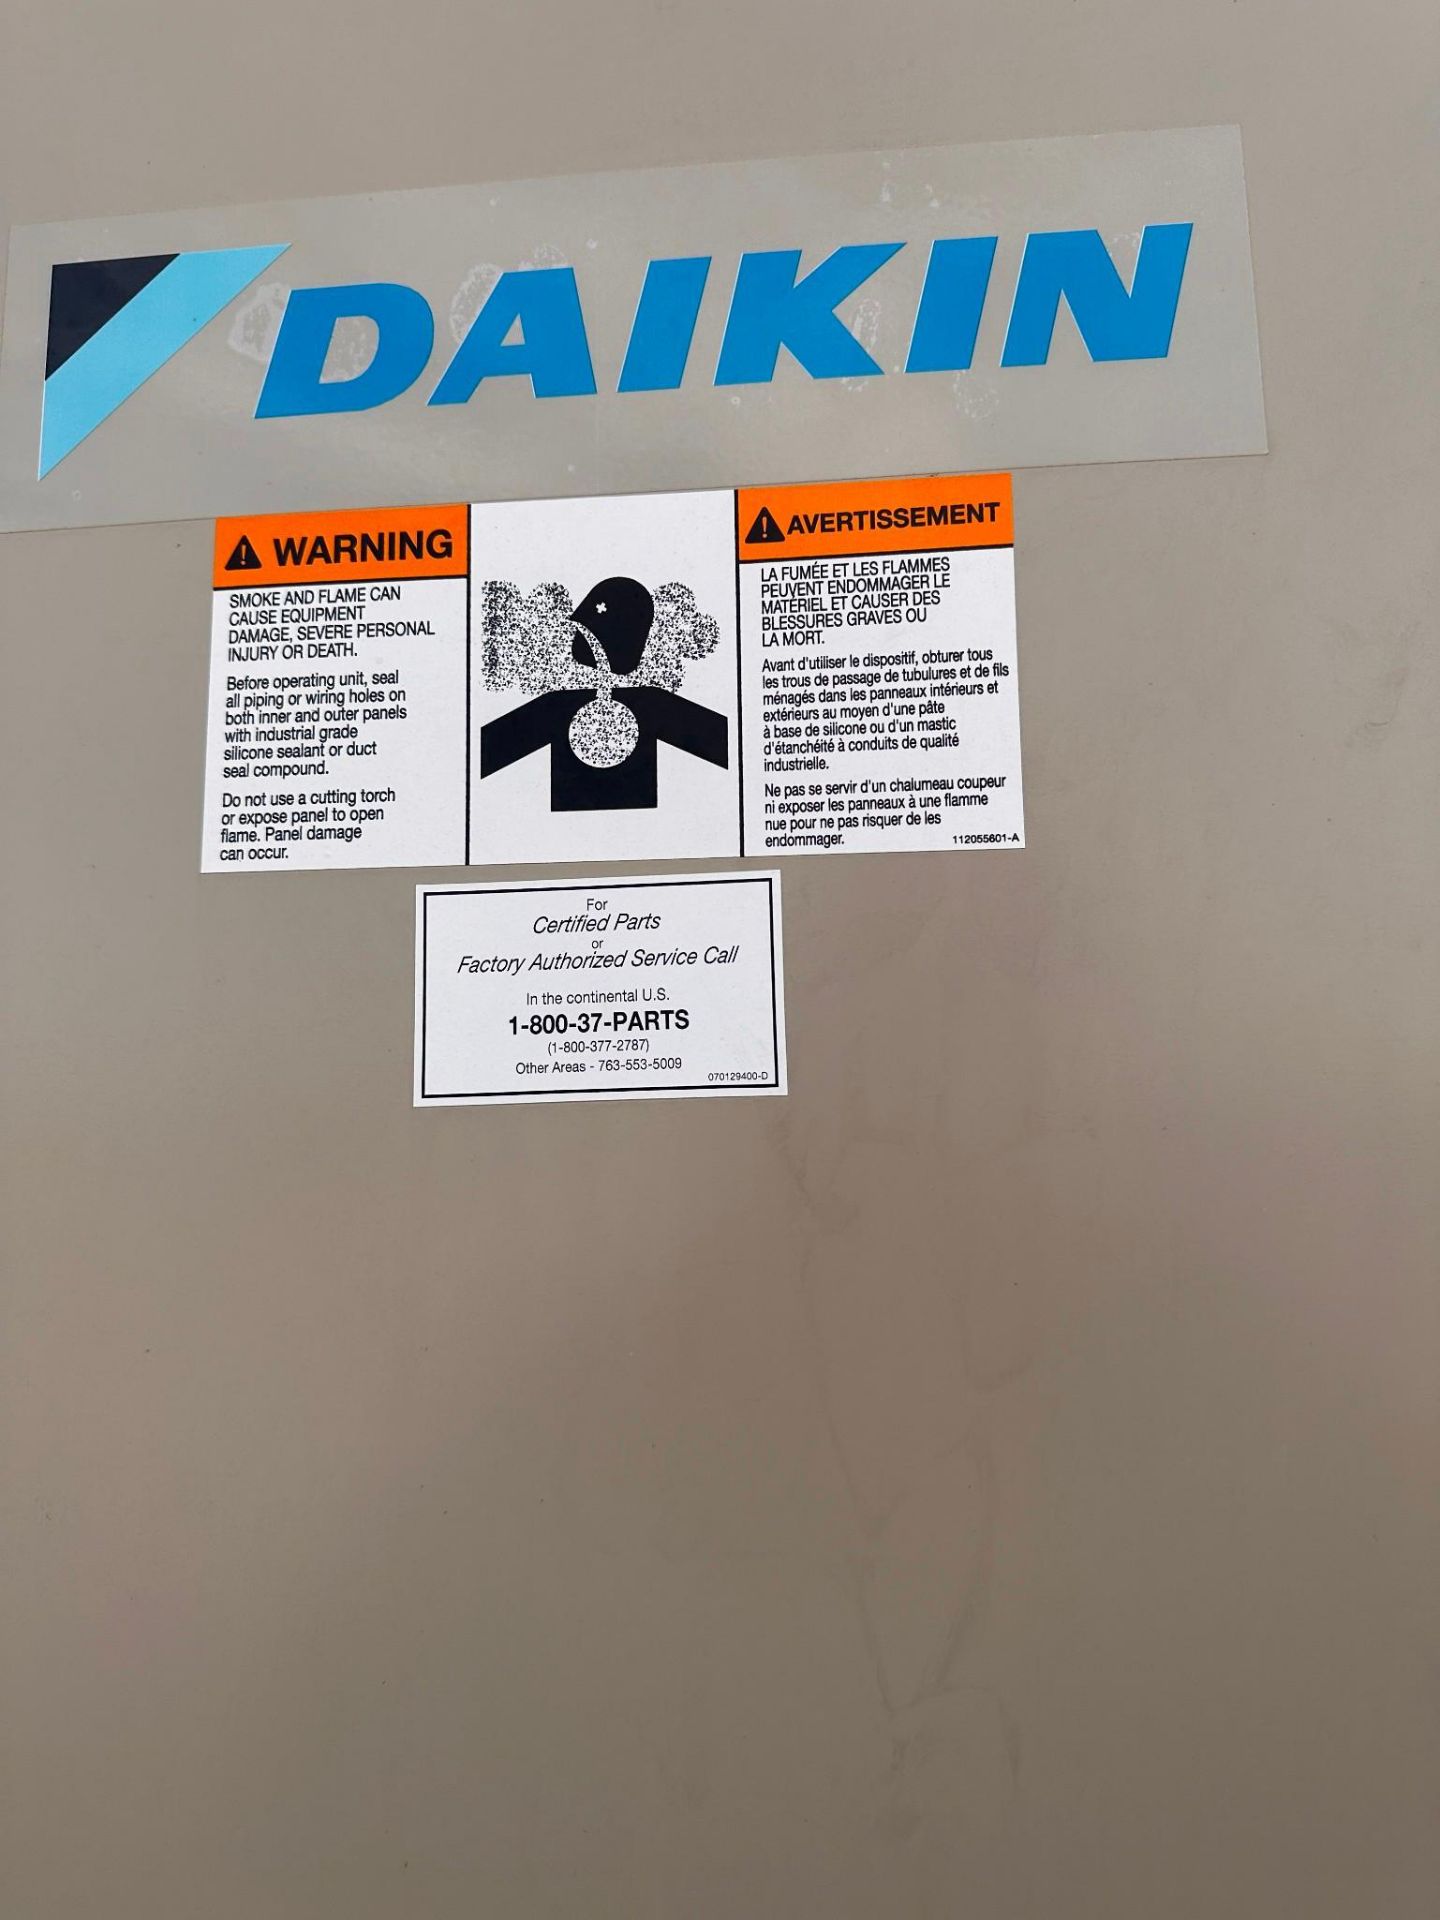 DAIKIN MODEL OAH 032GDQM CLEAR AIR PACKAGED AIR CONDITIONING UNIT - Image 31 of 31